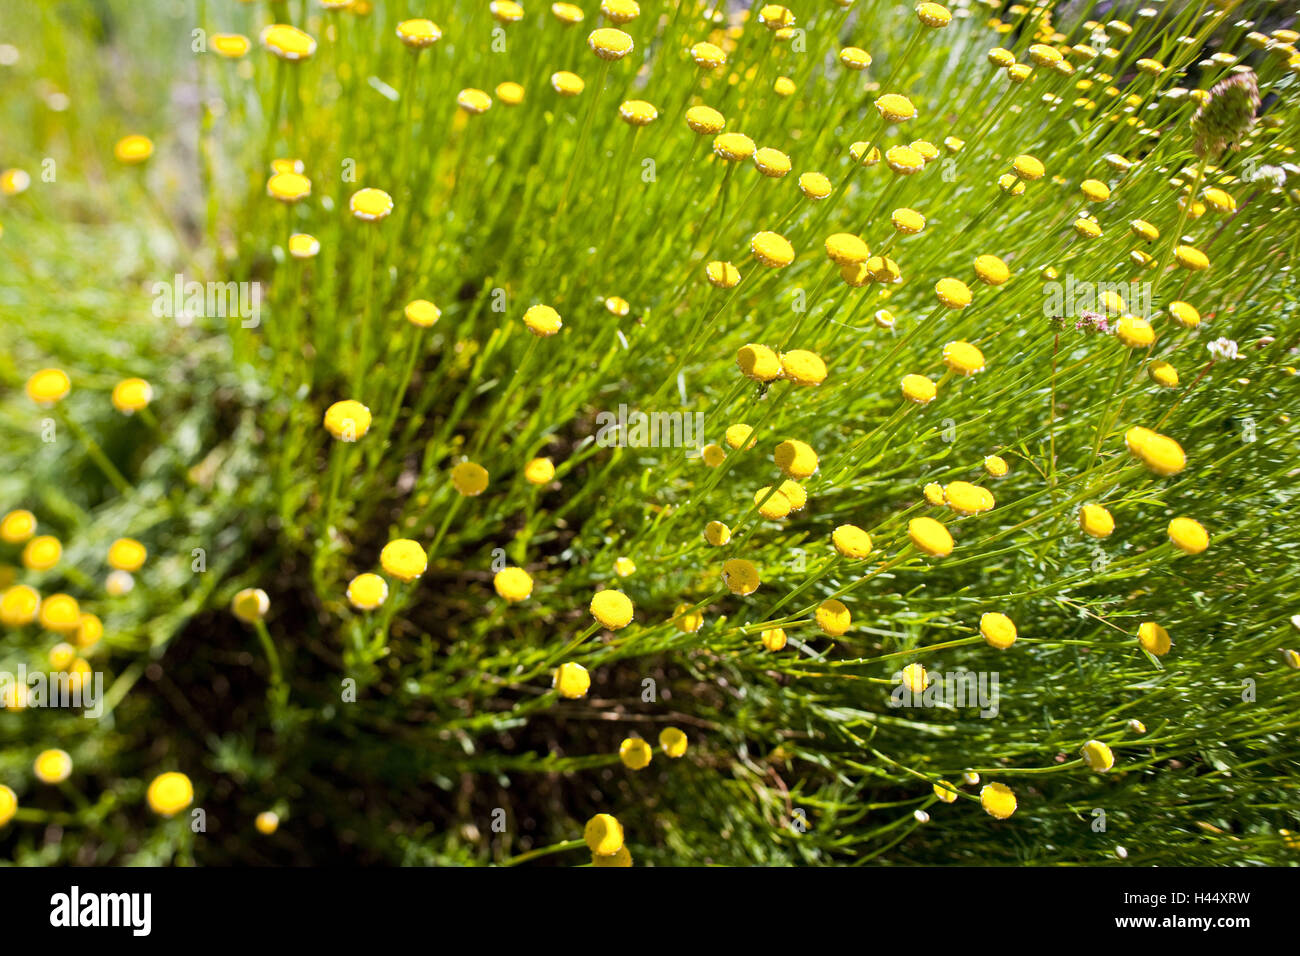 Midday flower plant, Drosanthemum, blossom, yellow blossom, medium close-up, flowers, blossoms, midday flower plants, buds, plants, nature, Stock Photo